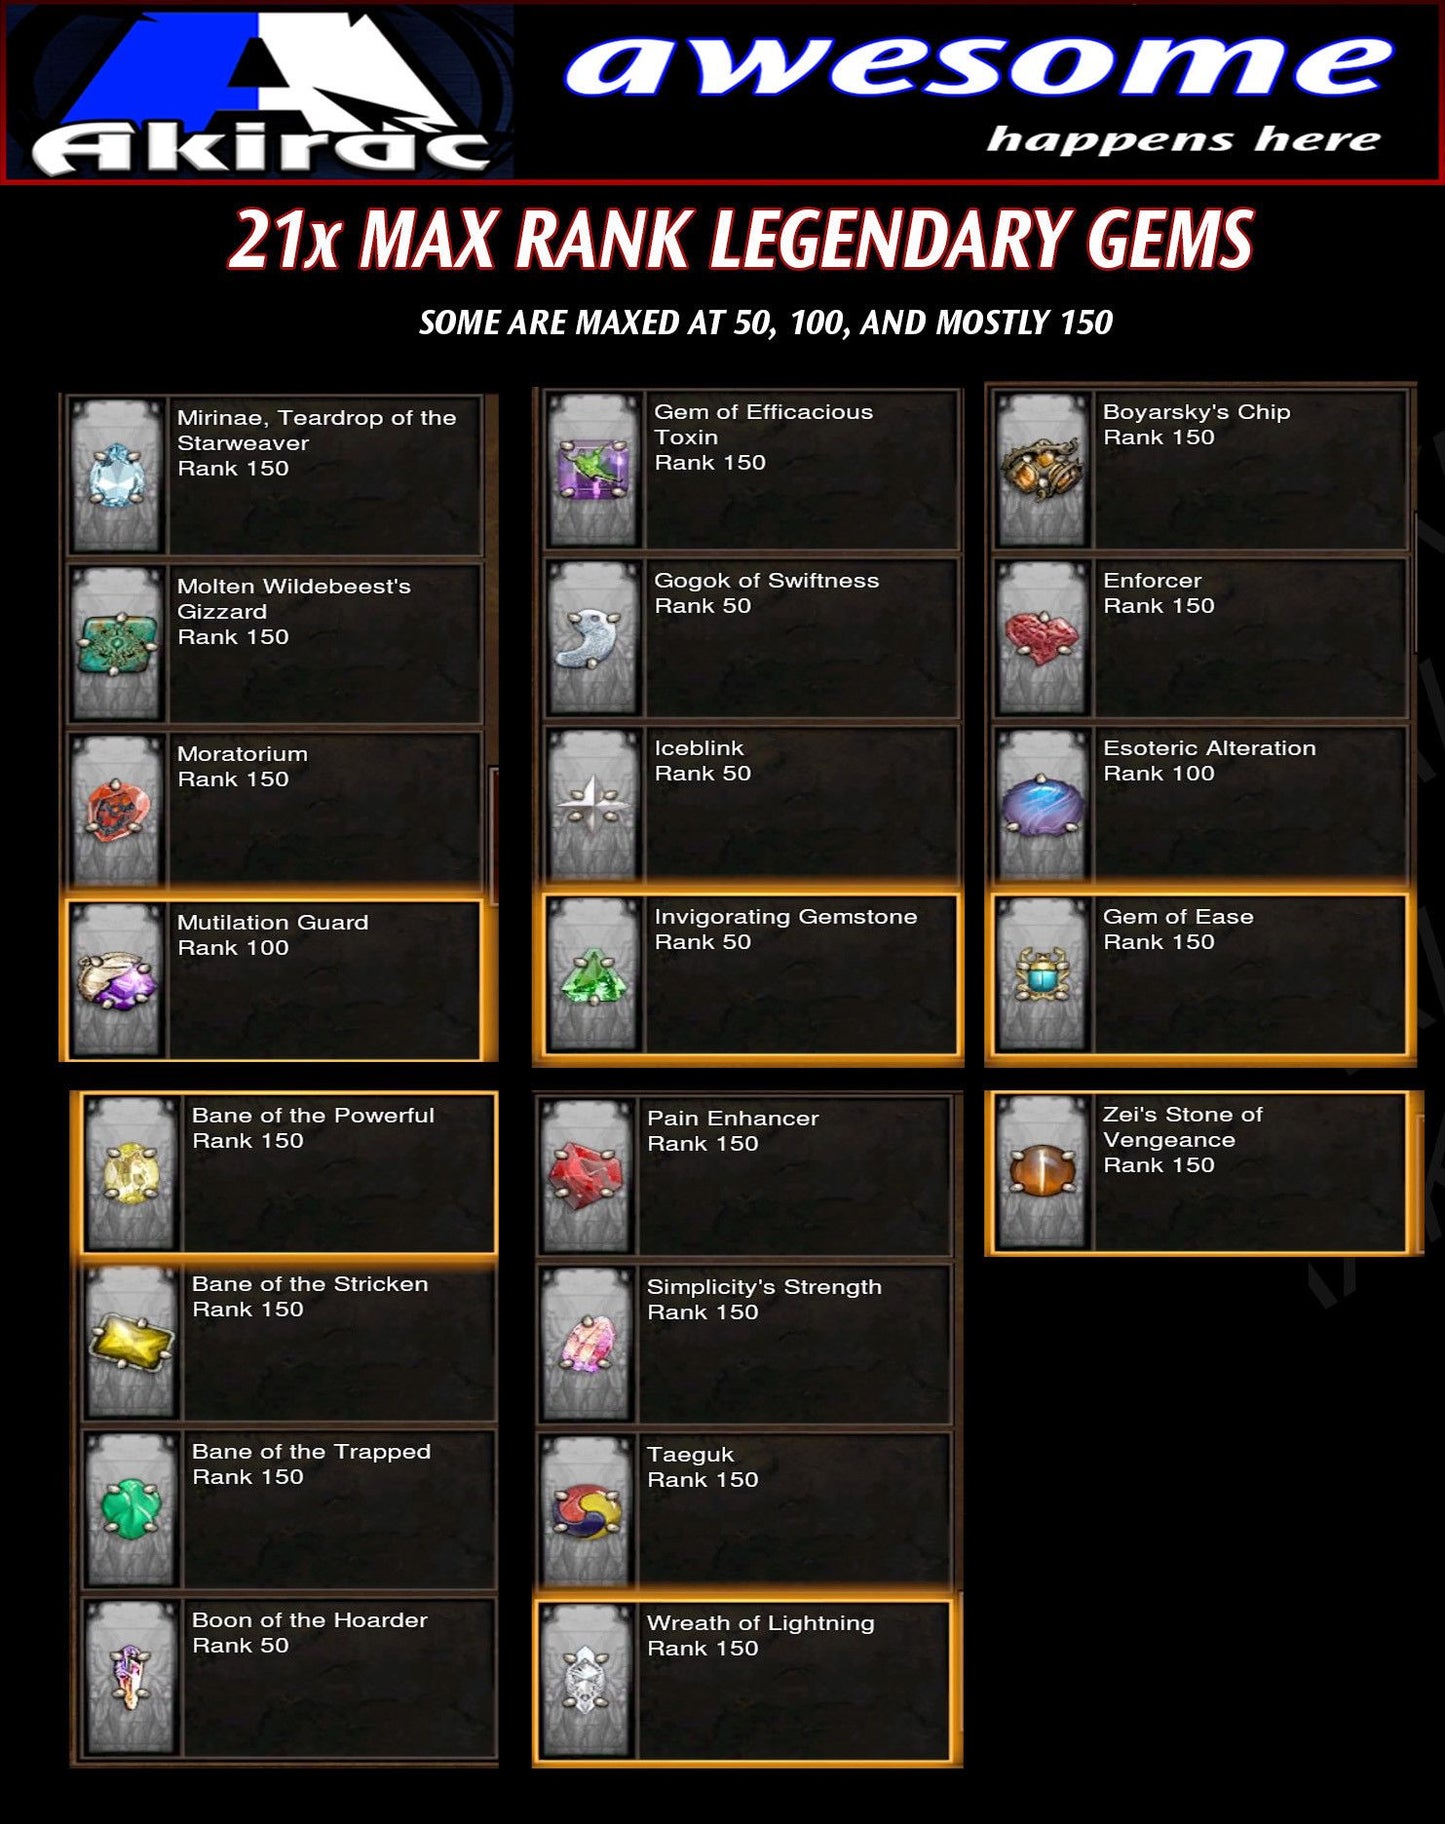 21x Legendary Gems (Max Rank, Unmodded) Diablo 3 Mods ROS Seasonal and Non Seasonal Save Mod - Modded Items and Gear - Hacks - Cheats - Trainers for Playstation 4 - Playstation 5 - Nintendo Switch - Xbox One